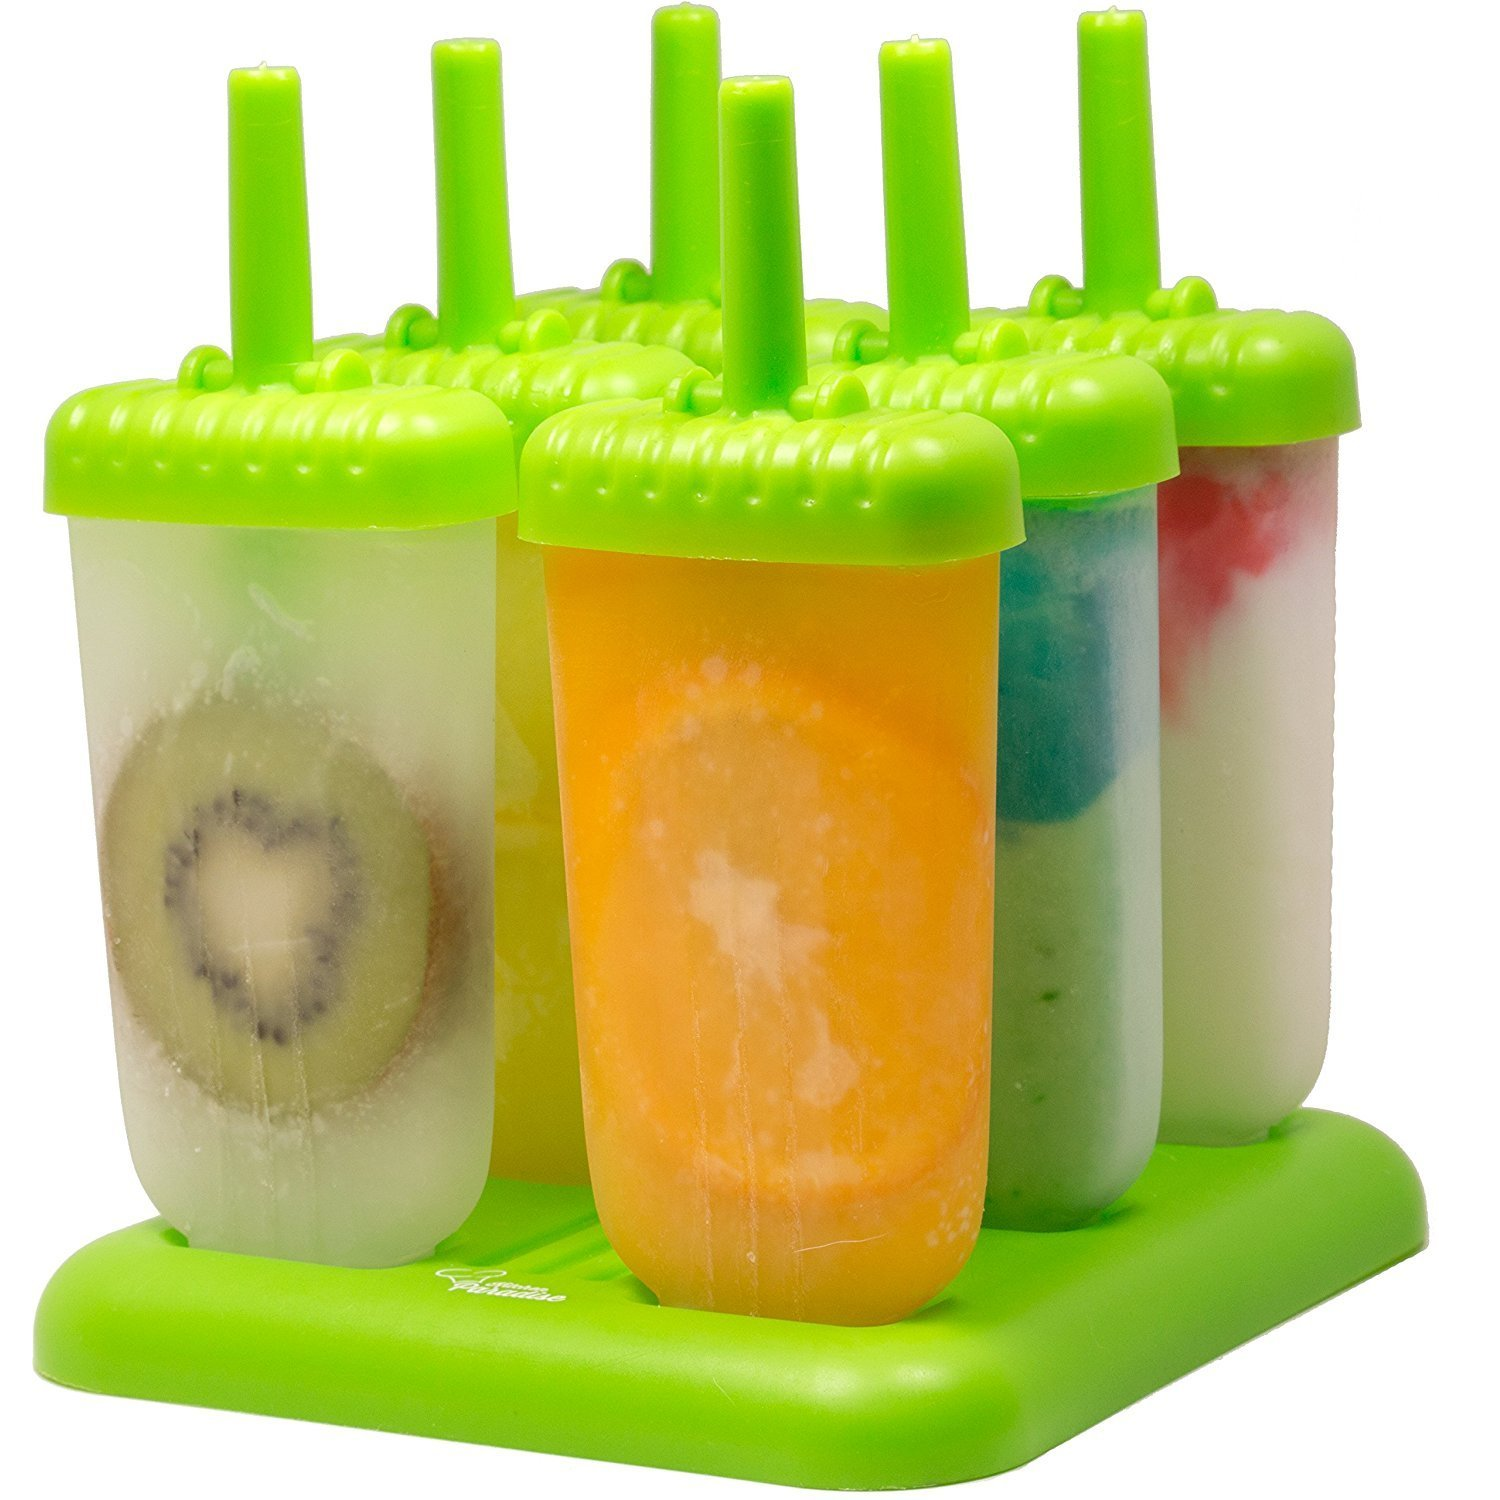 Ice Pop Maker Popsicle Mold Set of 6 Only $5.99!